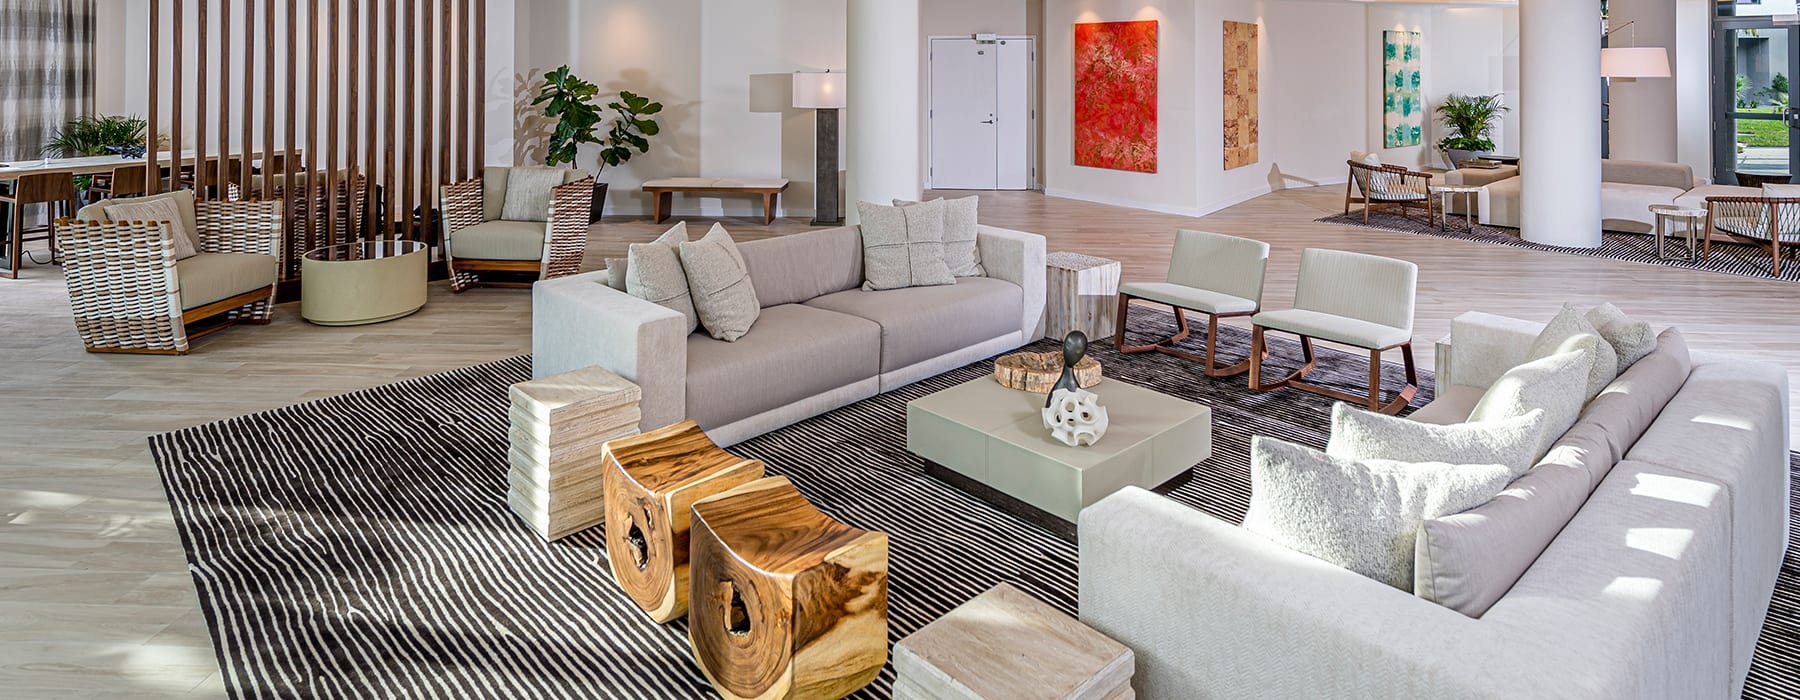 lounge with modern seating and ample space for community